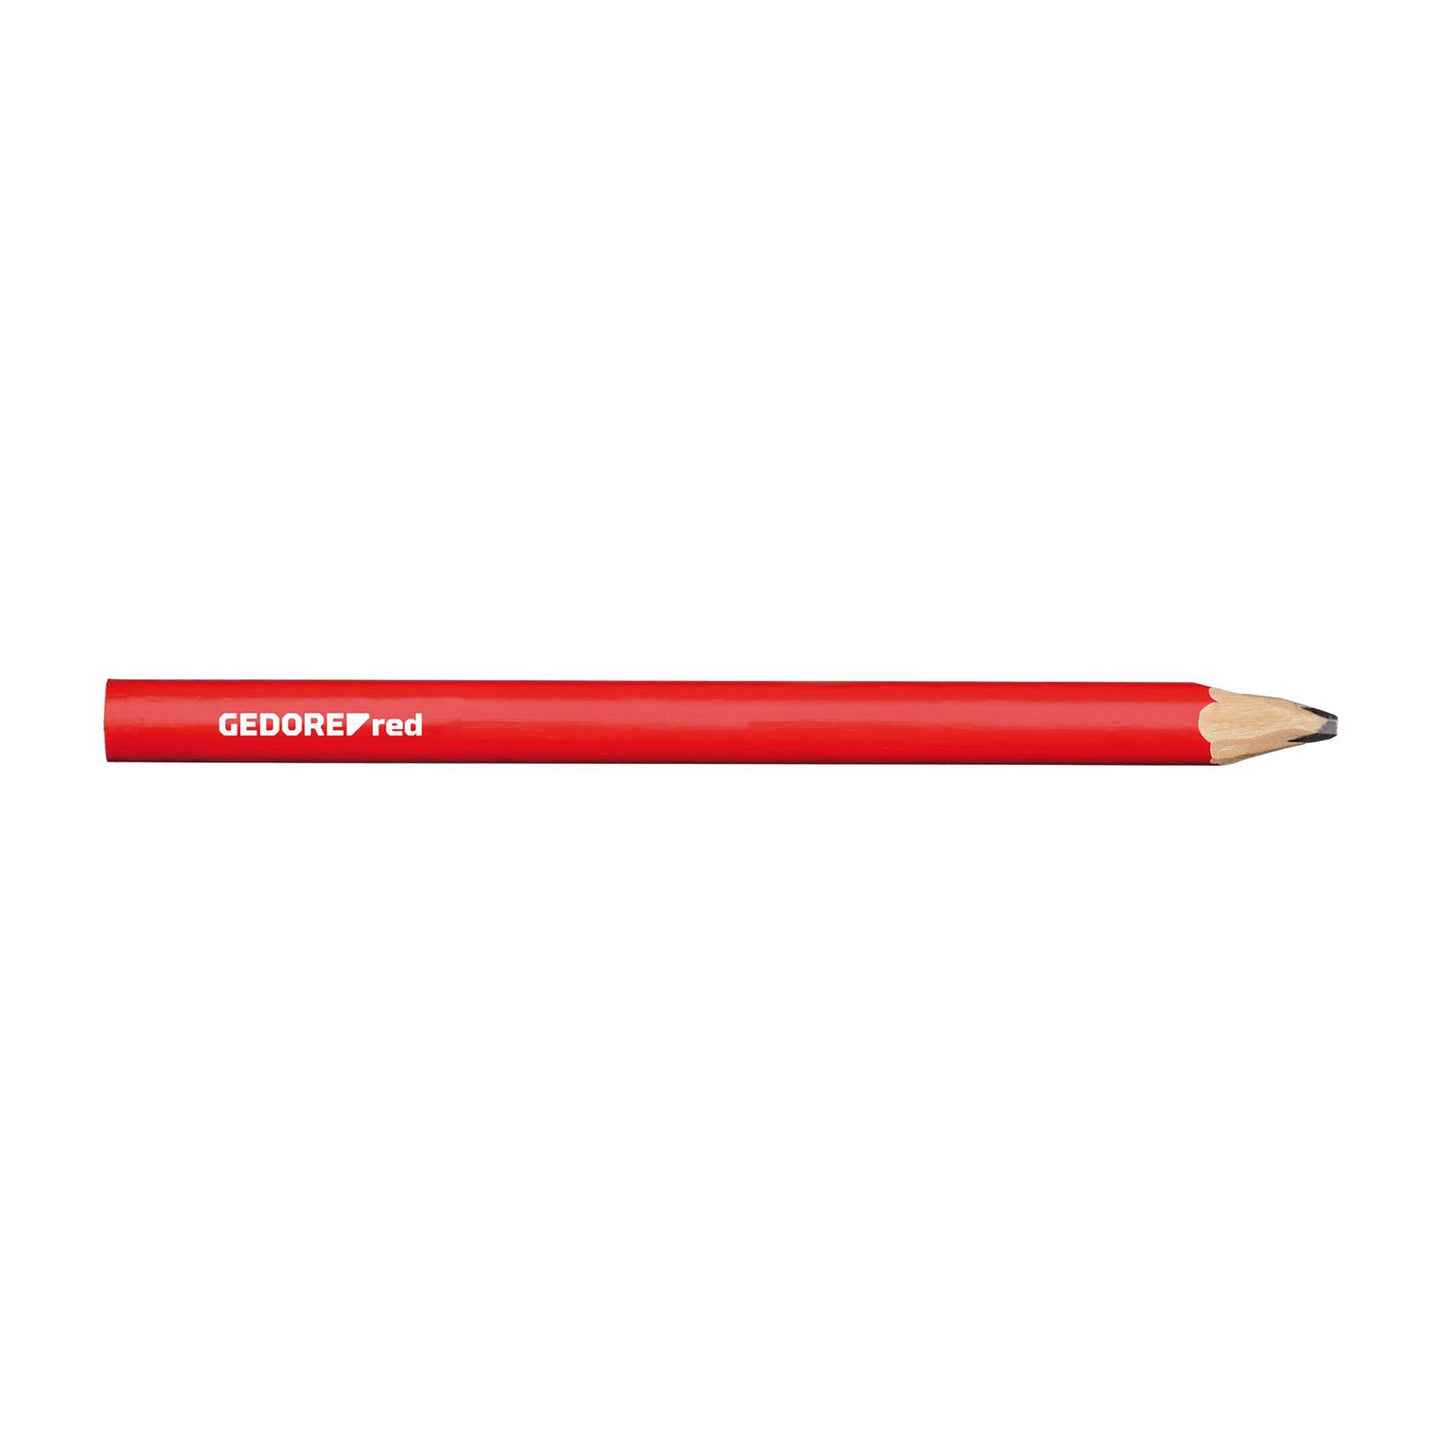 GEDORE red R90950012 - Carpenter's pencil, L=175 mm, oval, red, 12 pieces (3301432)